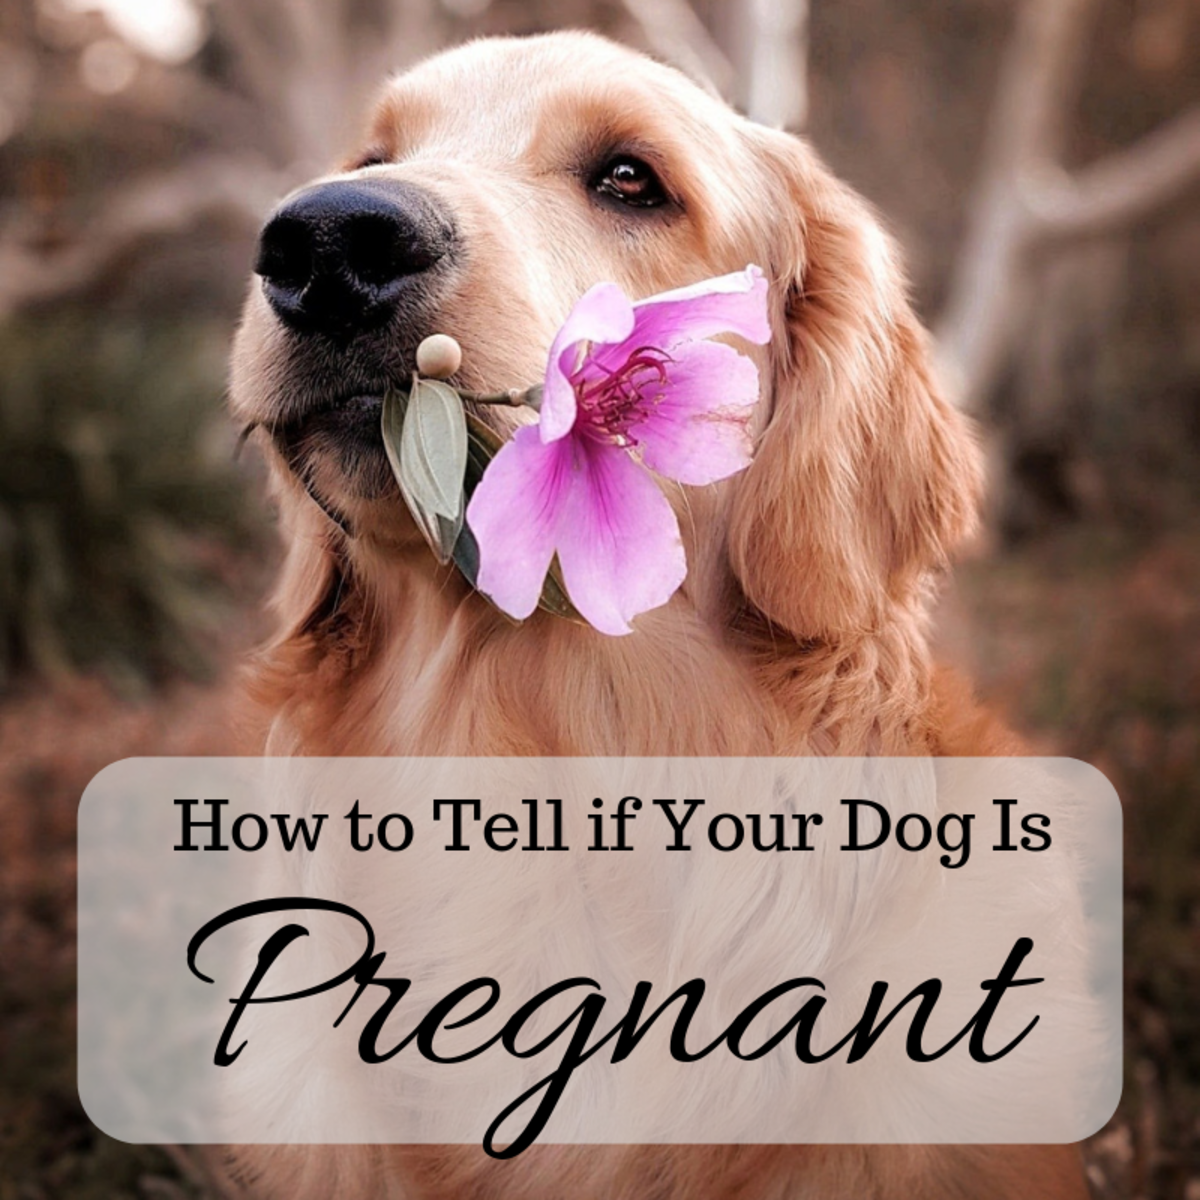 Dog pregnancy can be difficult to detect. Learn the signs, see your vet, and
consider using a canine pregnancy test. 